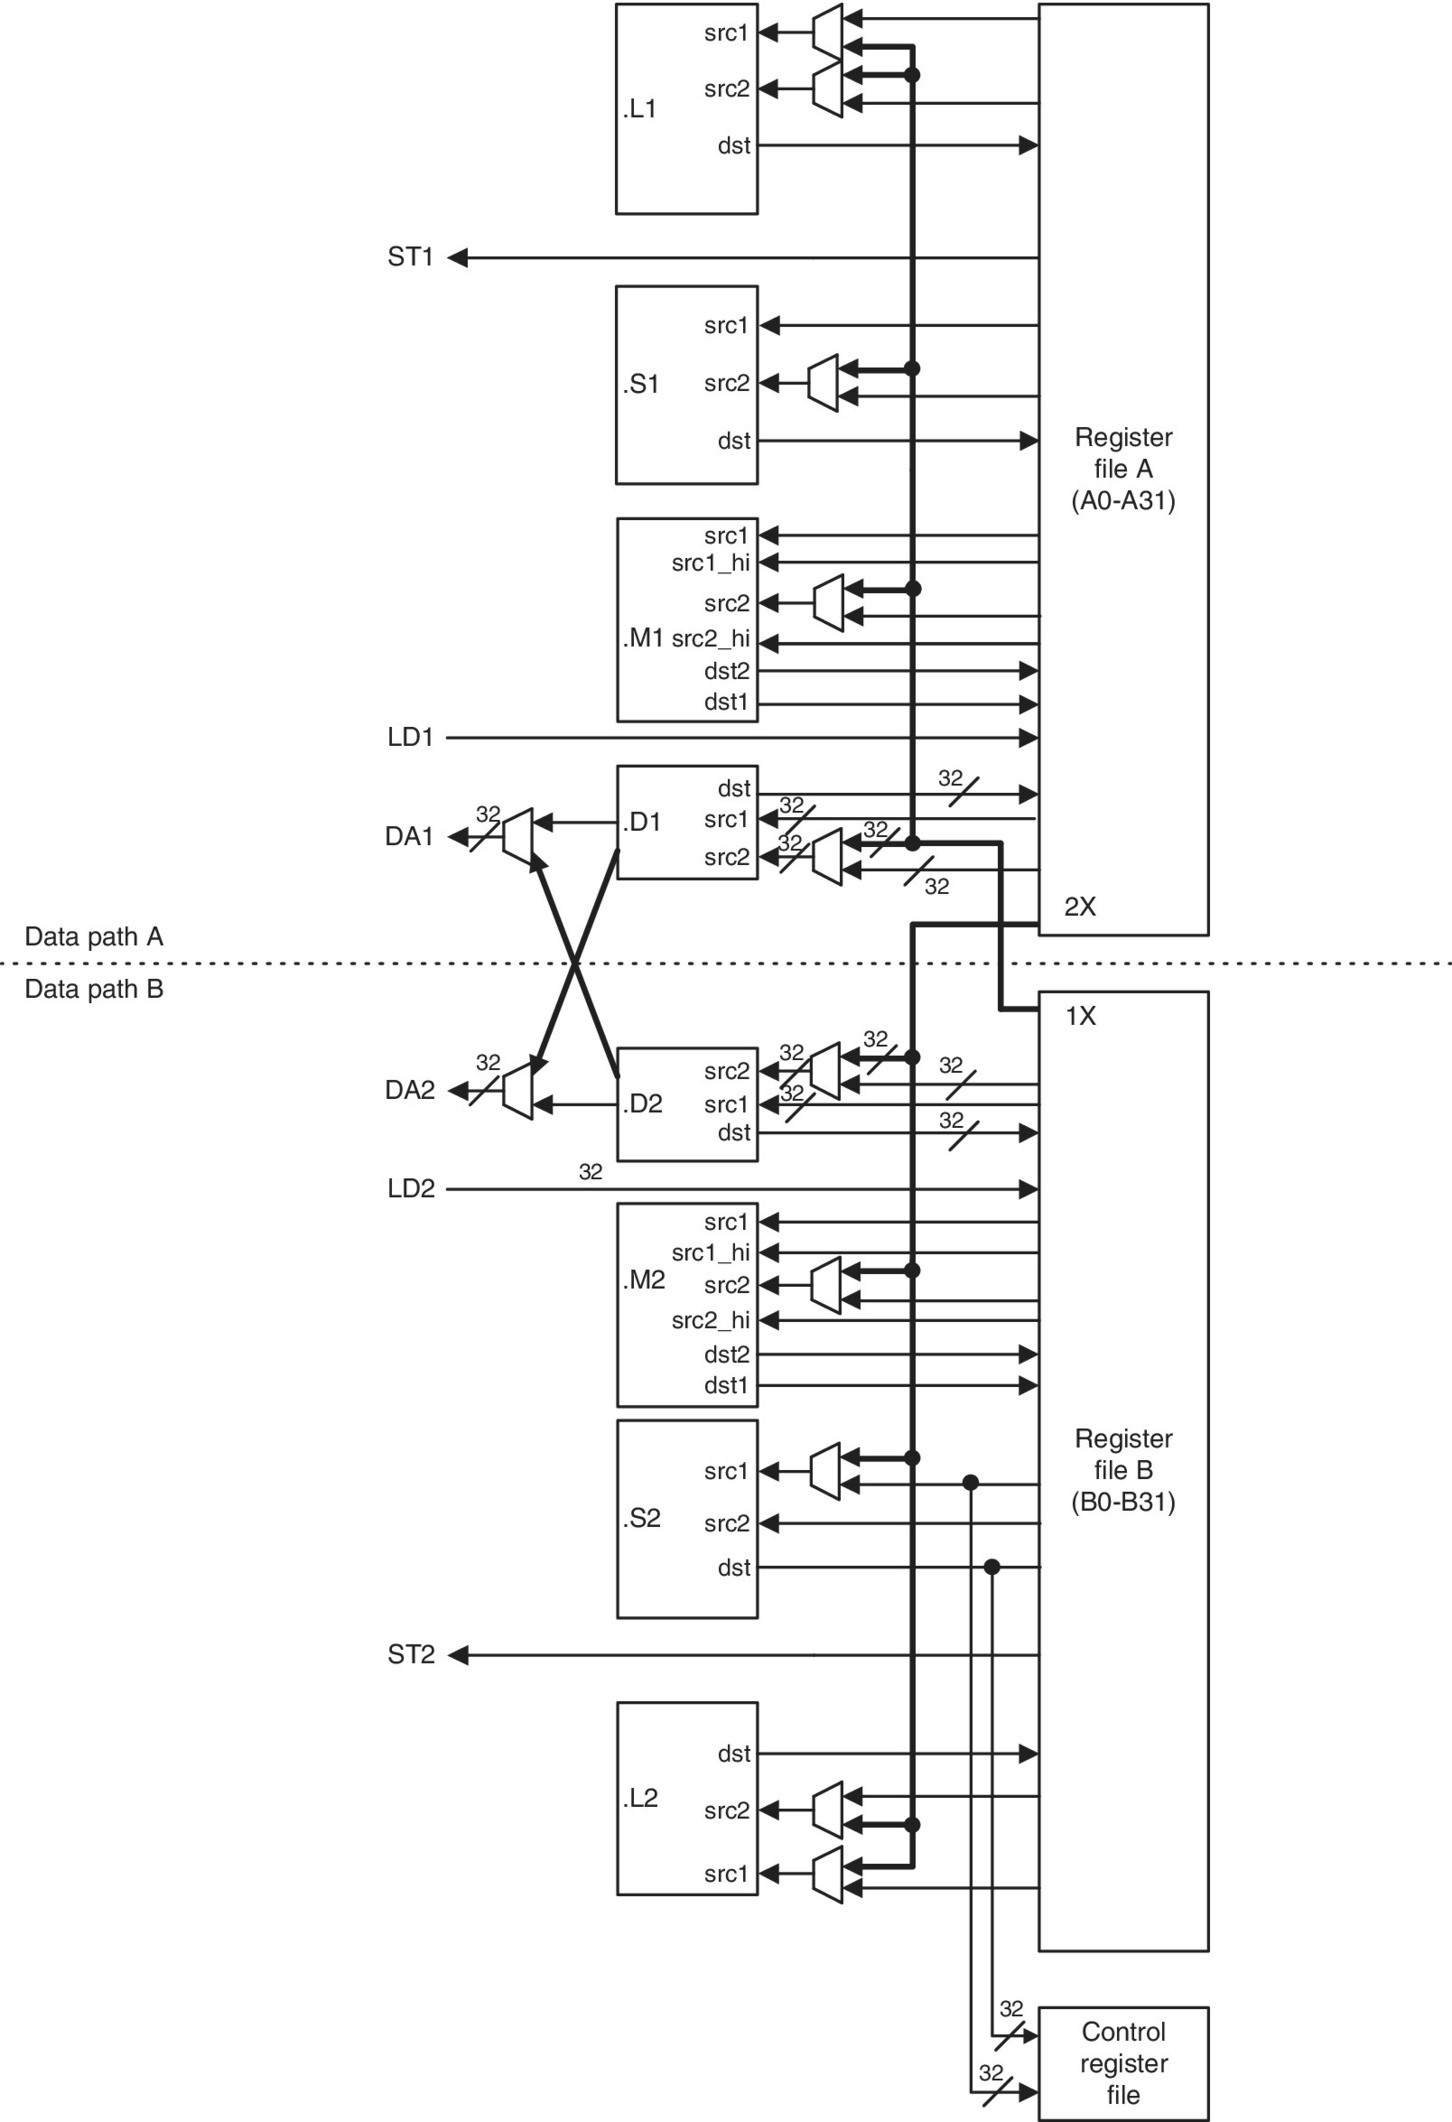 Schematic illustrating the TMS320C66x CPU data path and control from register file A (A0-A31) to register file B (B0-B31), to control register file with arrows linked to boxes labeled .L1, .S1, and .M1 etc.